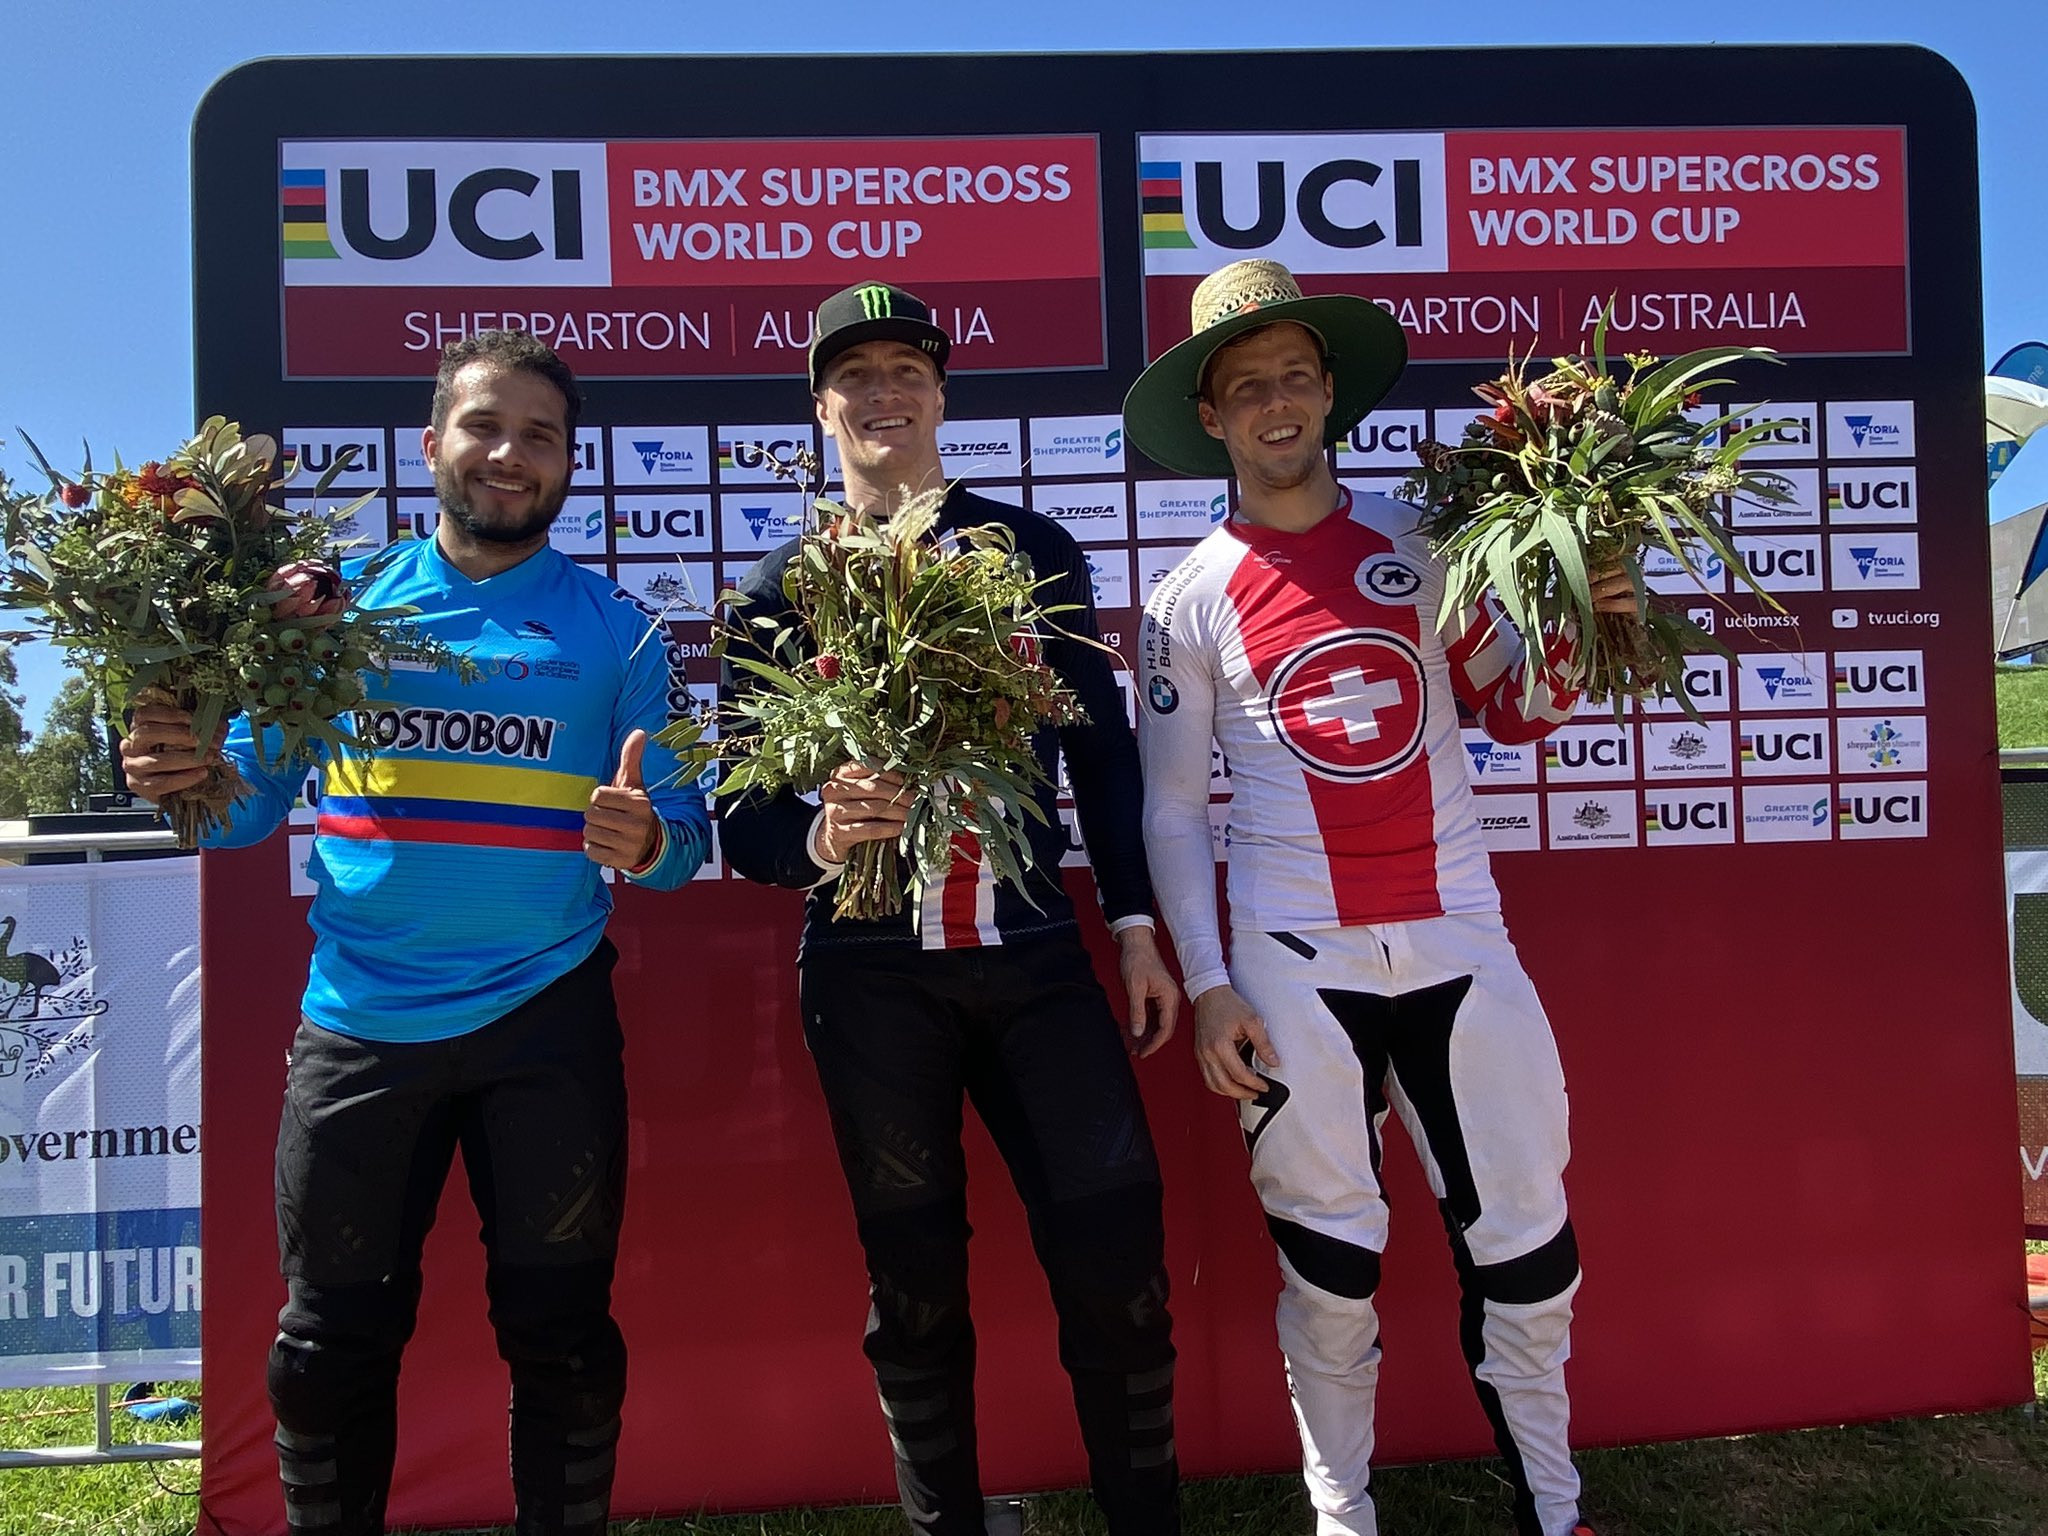 Olympic champion Connor Fields won the competition, followed by Carlos Alberto Ramírez Yepes of Colombia and David Graf of Switzerland ©UCI